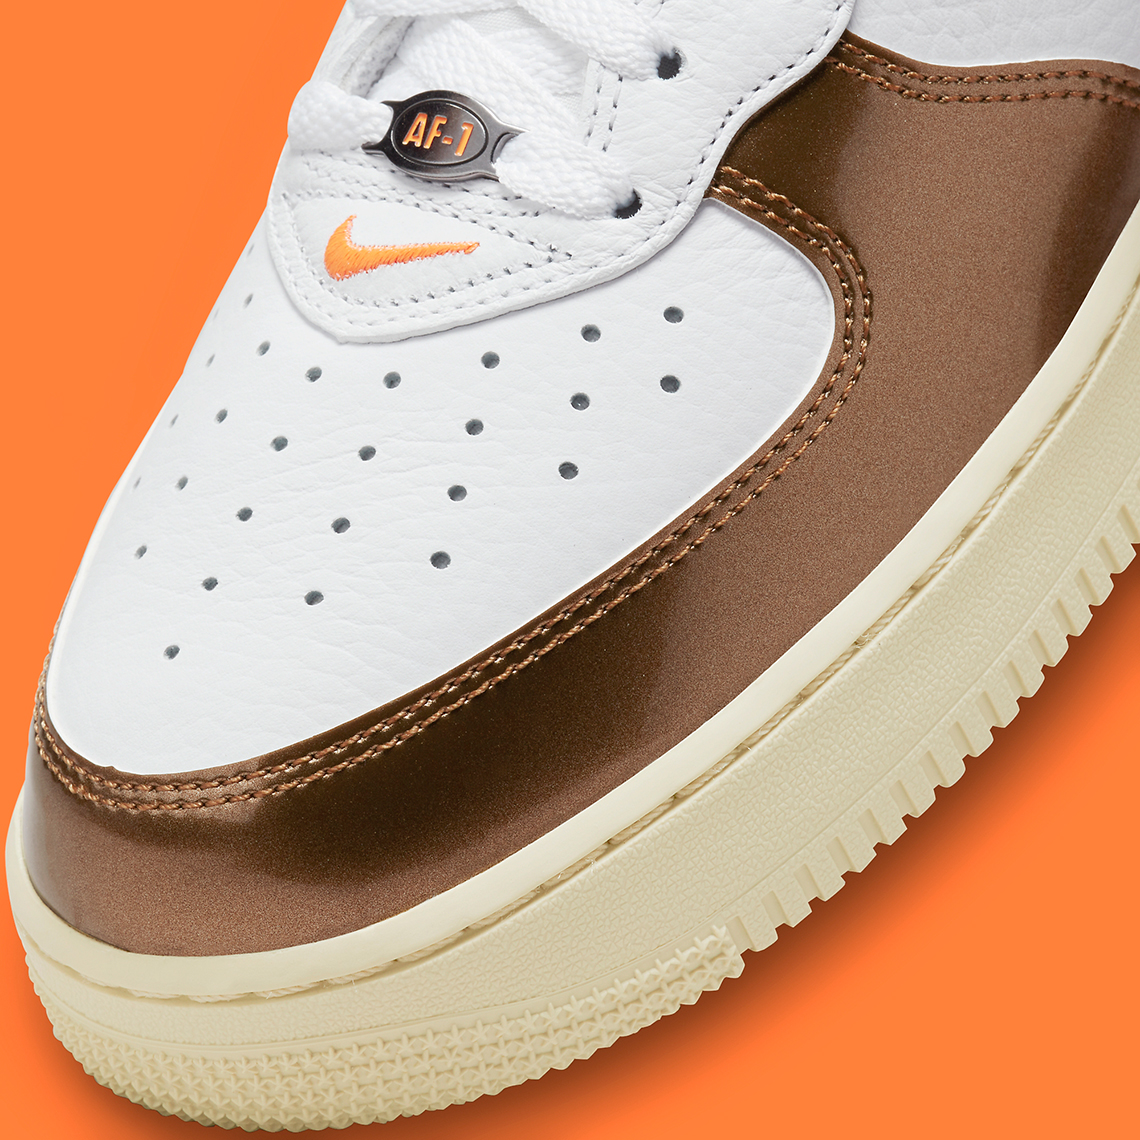 nike air force 1 pearl white ale brown outfit｜TikTok Search